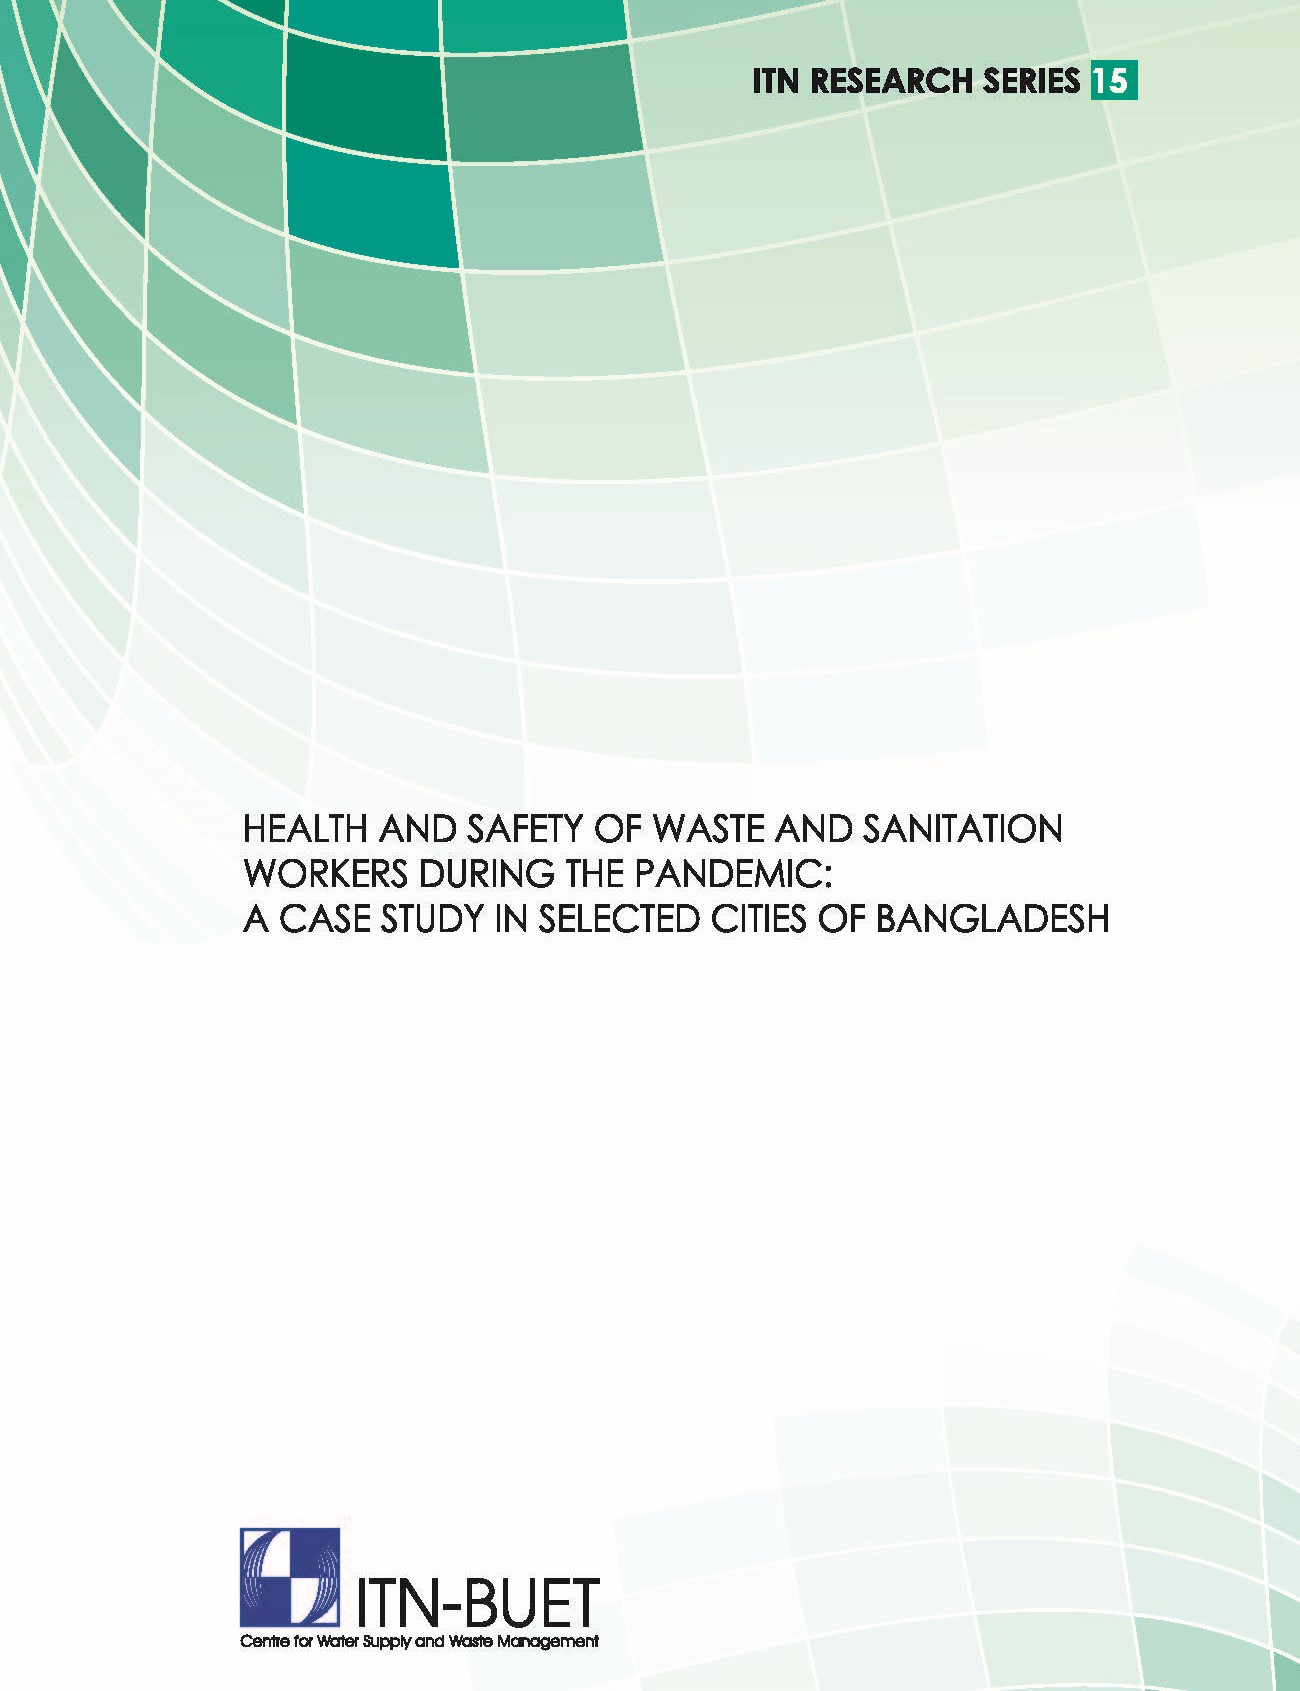 Health and Safety of Waste and Sanitation Workers during the Pandemic: A Case Study in Selected Cities of Bangladesh